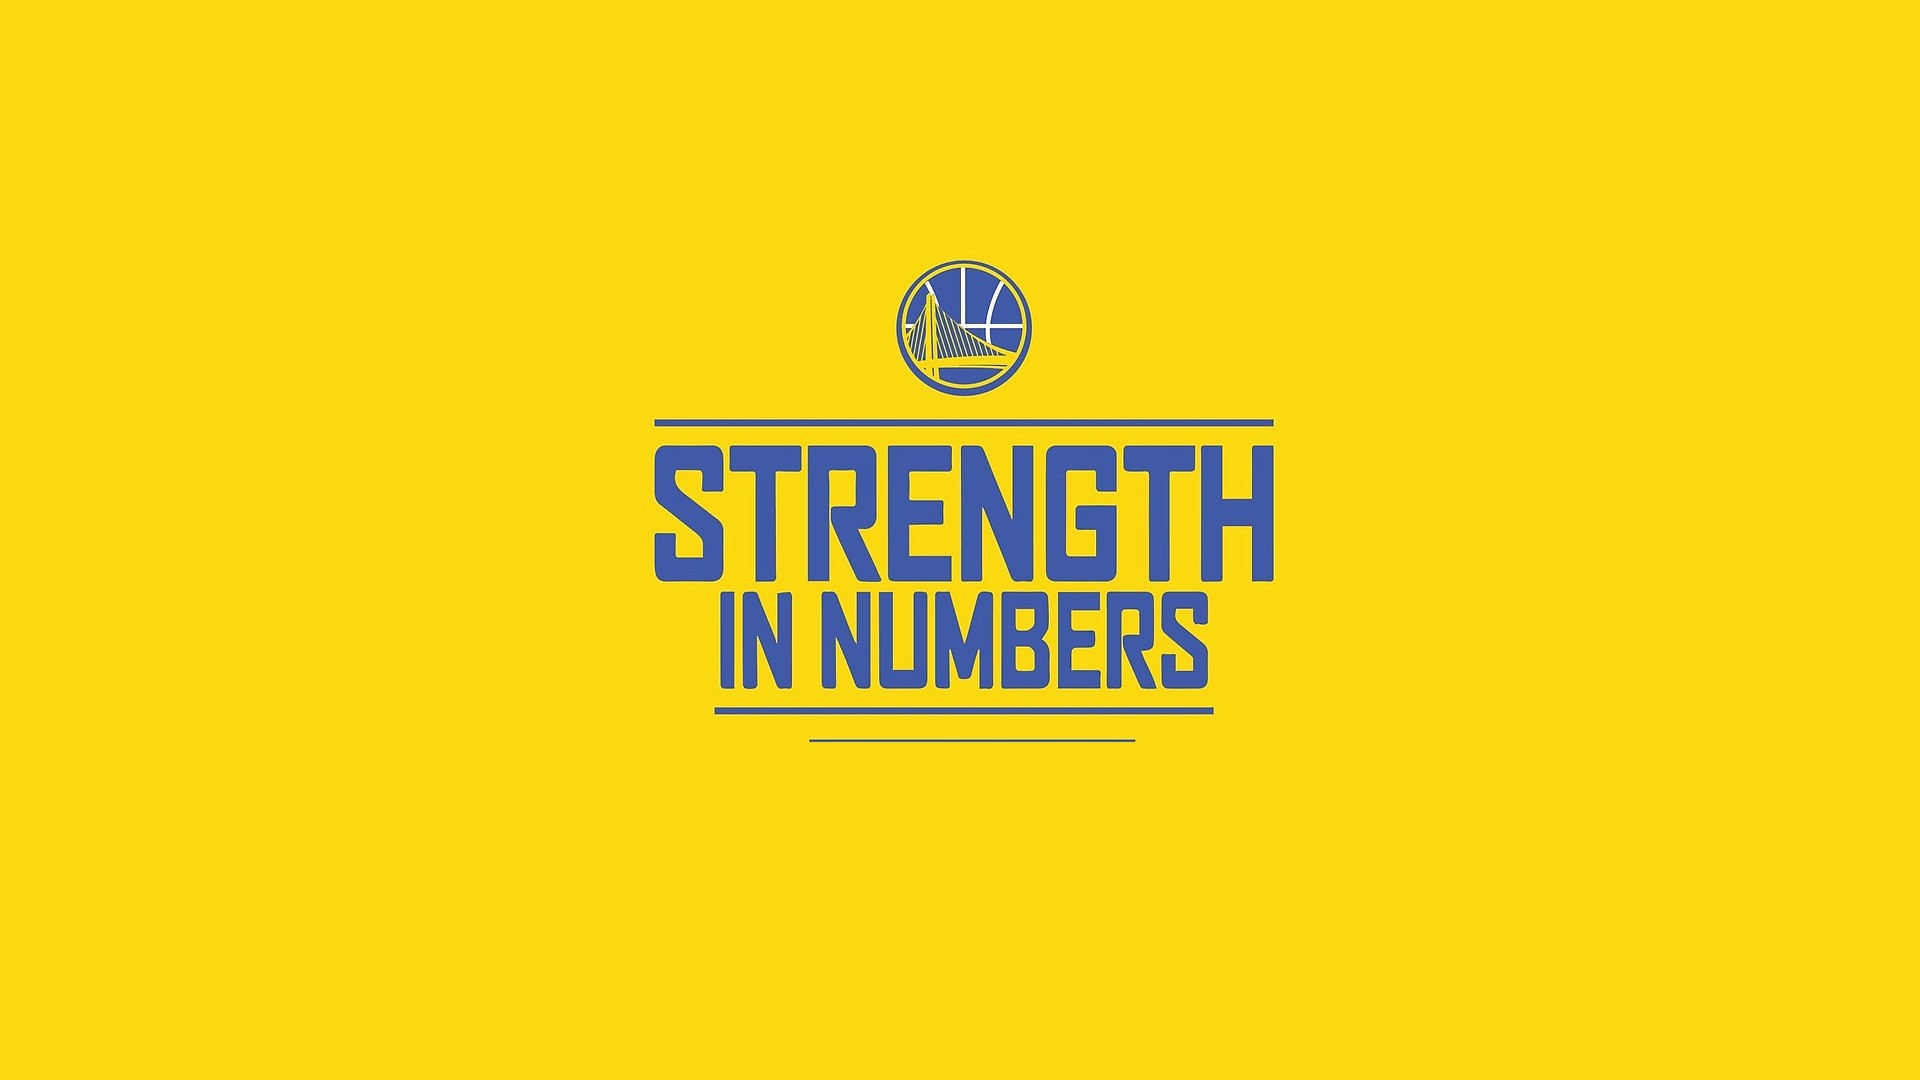 Golden State Warriors Logo For PC Wallpaper with image dimensions 1920x1080 pixel. You can make this wallpaper for your Desktop Computer Backgrounds, Windows or Mac Screensavers, iPhone Lock screen, Tablet or Android and another Mobile Phone device